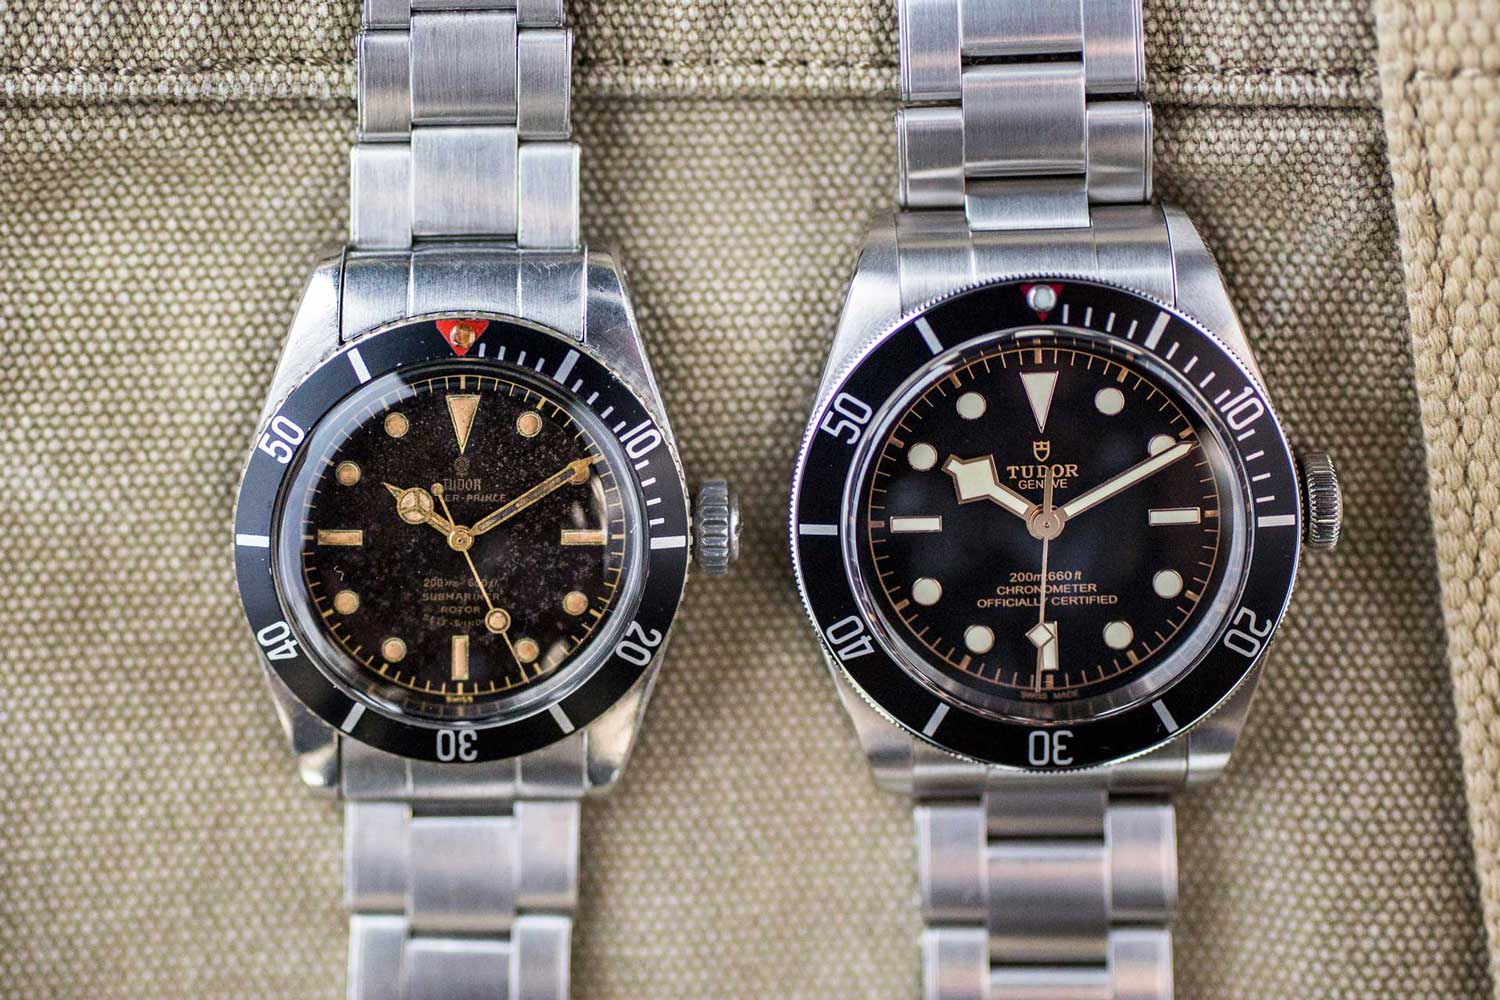 Side by side, the shared identity between the vintage Submariner and the modern Black Bay is clear.